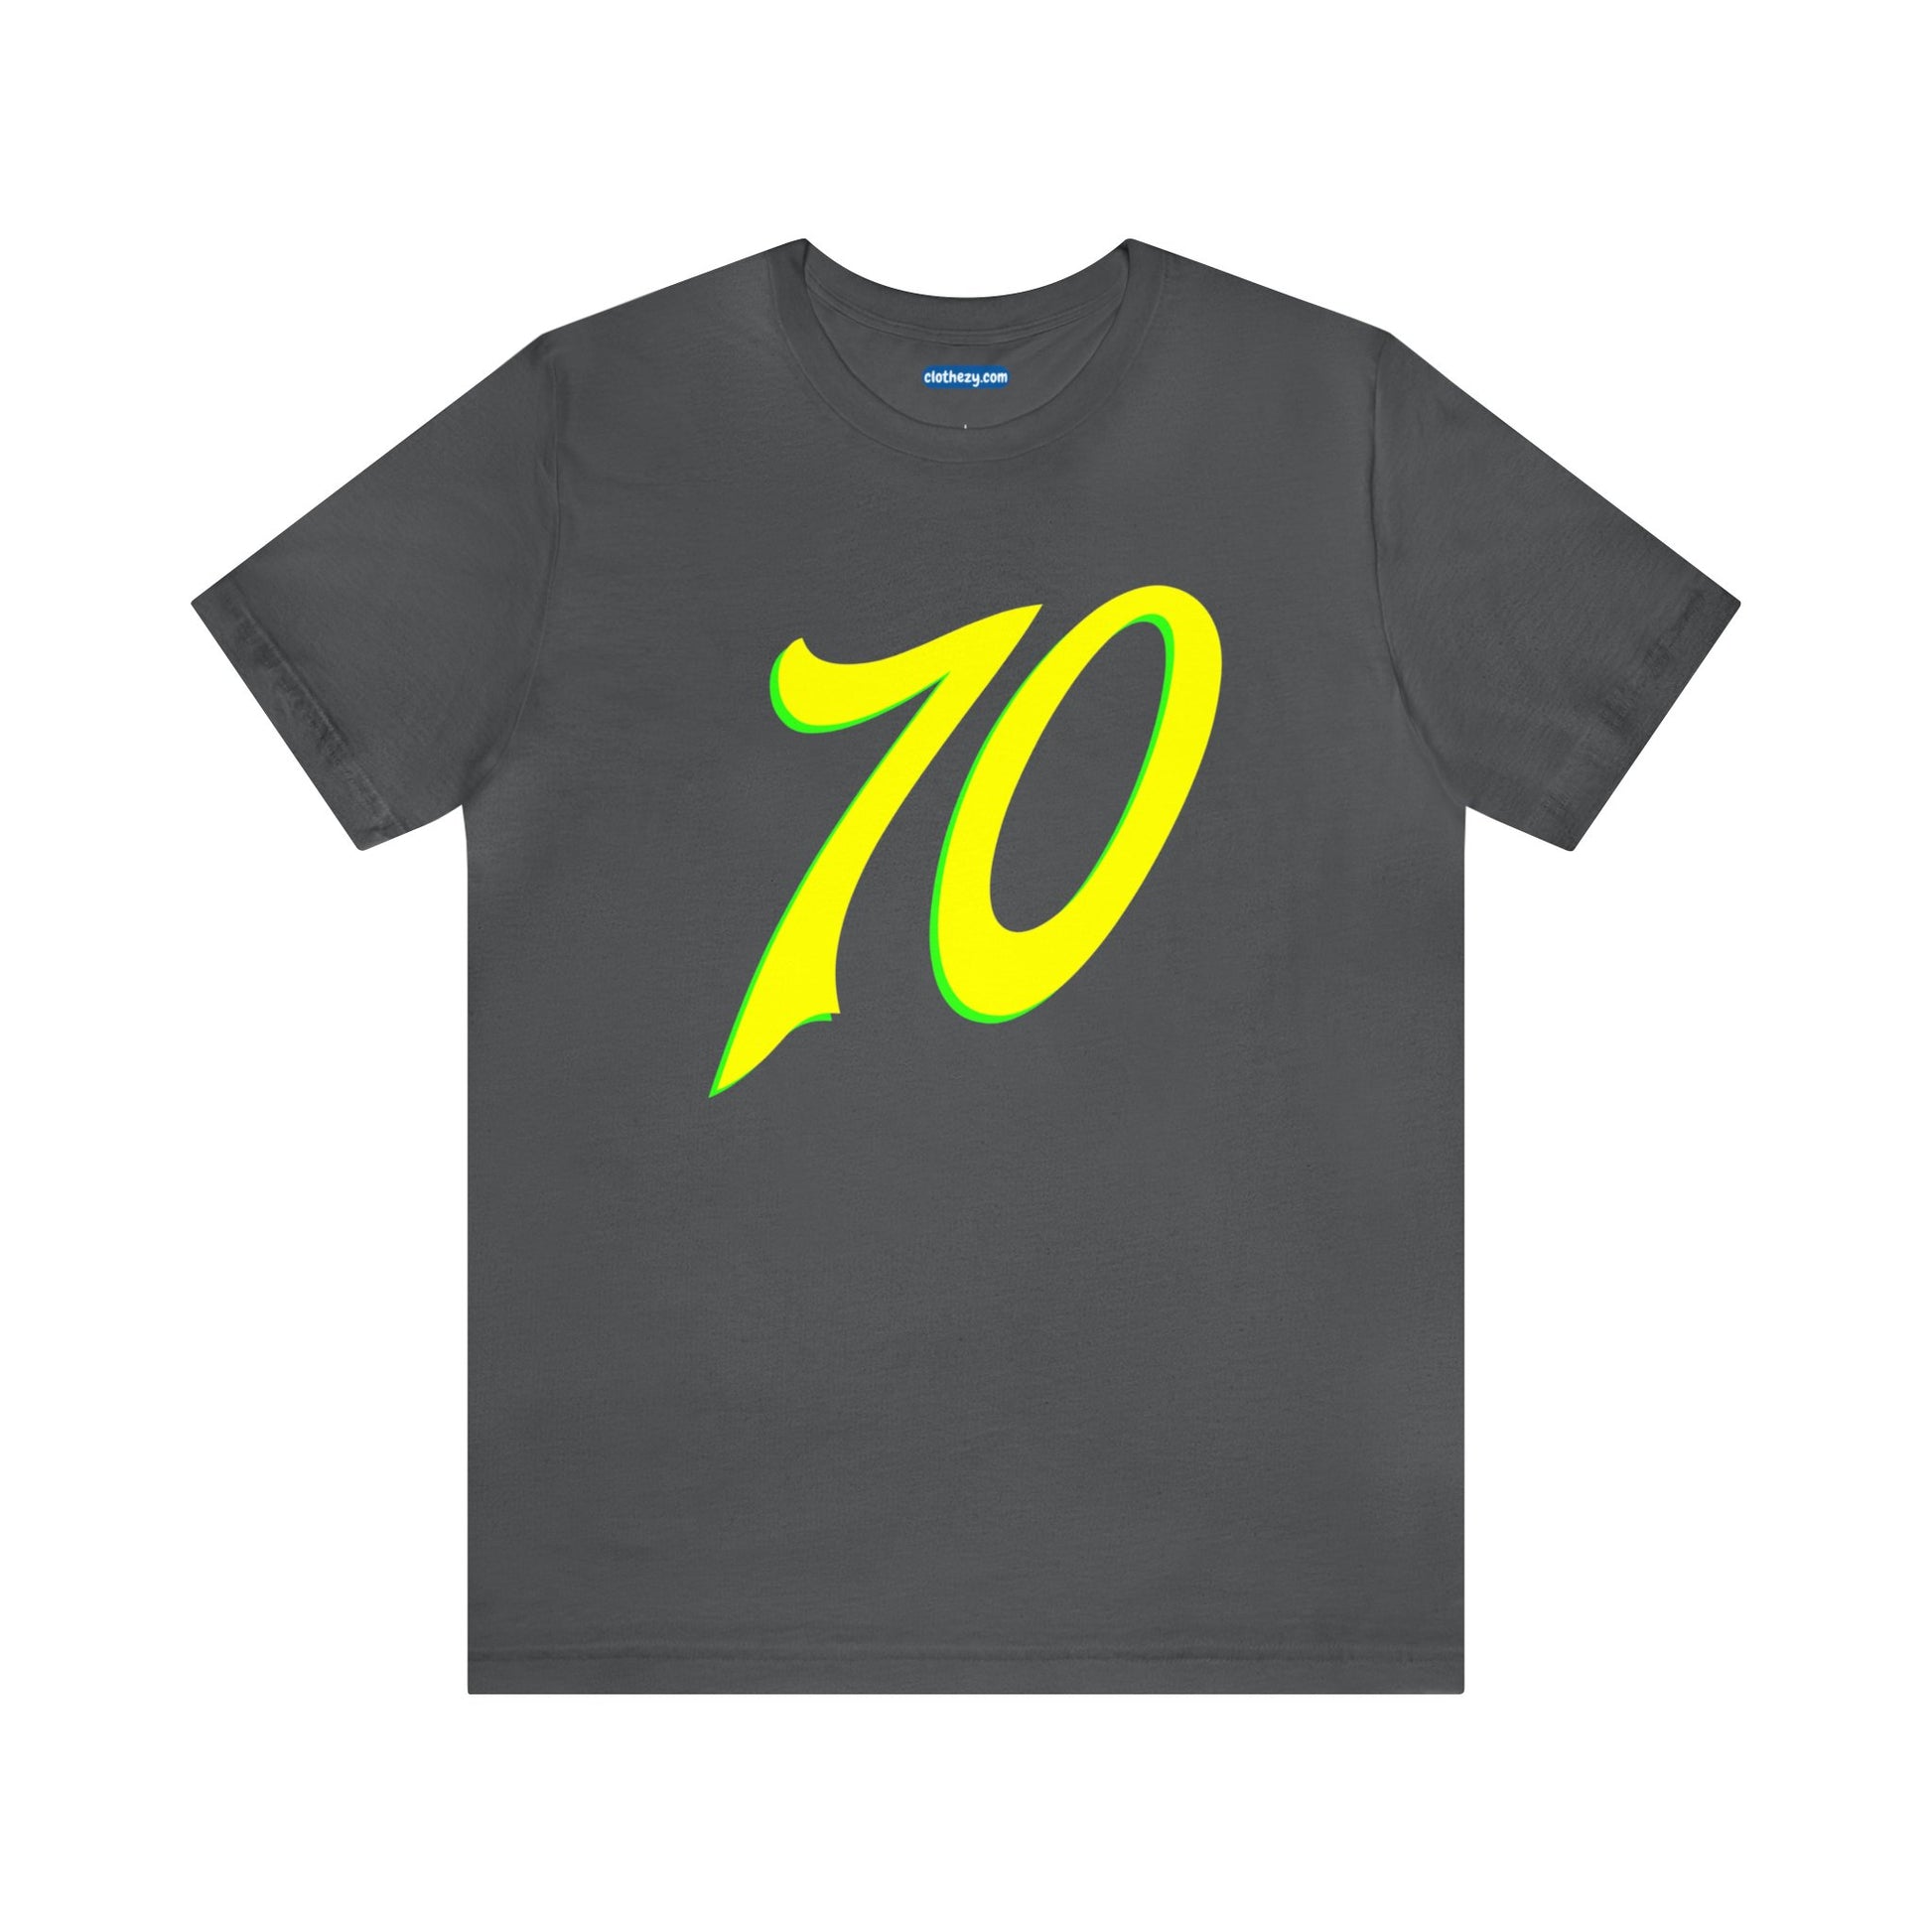 Number 70 Design - Soft Cotton Tee for birthdays and celebrations, Gift for friends and family, Multiple Options by clothezy.com in Black Size Small - Buy Now